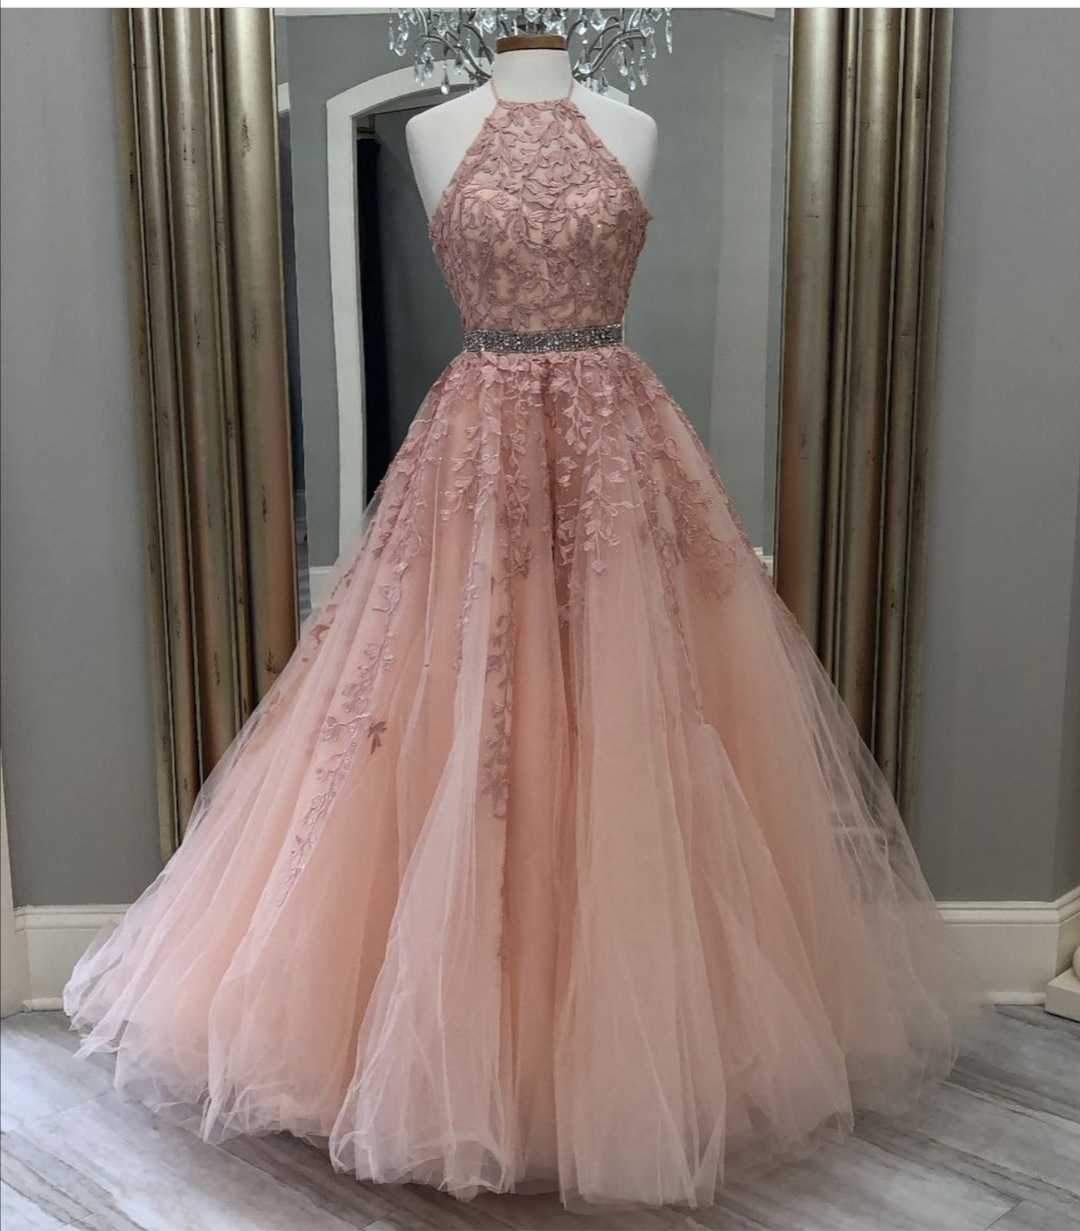 halter prom dresses, lace applique prom dress, pink prom dresses, beaded prom dresses, robes de cocktail, a line prom dresses, prom gown, evening dresses long, cheap prom dresses, pageant dresses for women, women fashion 